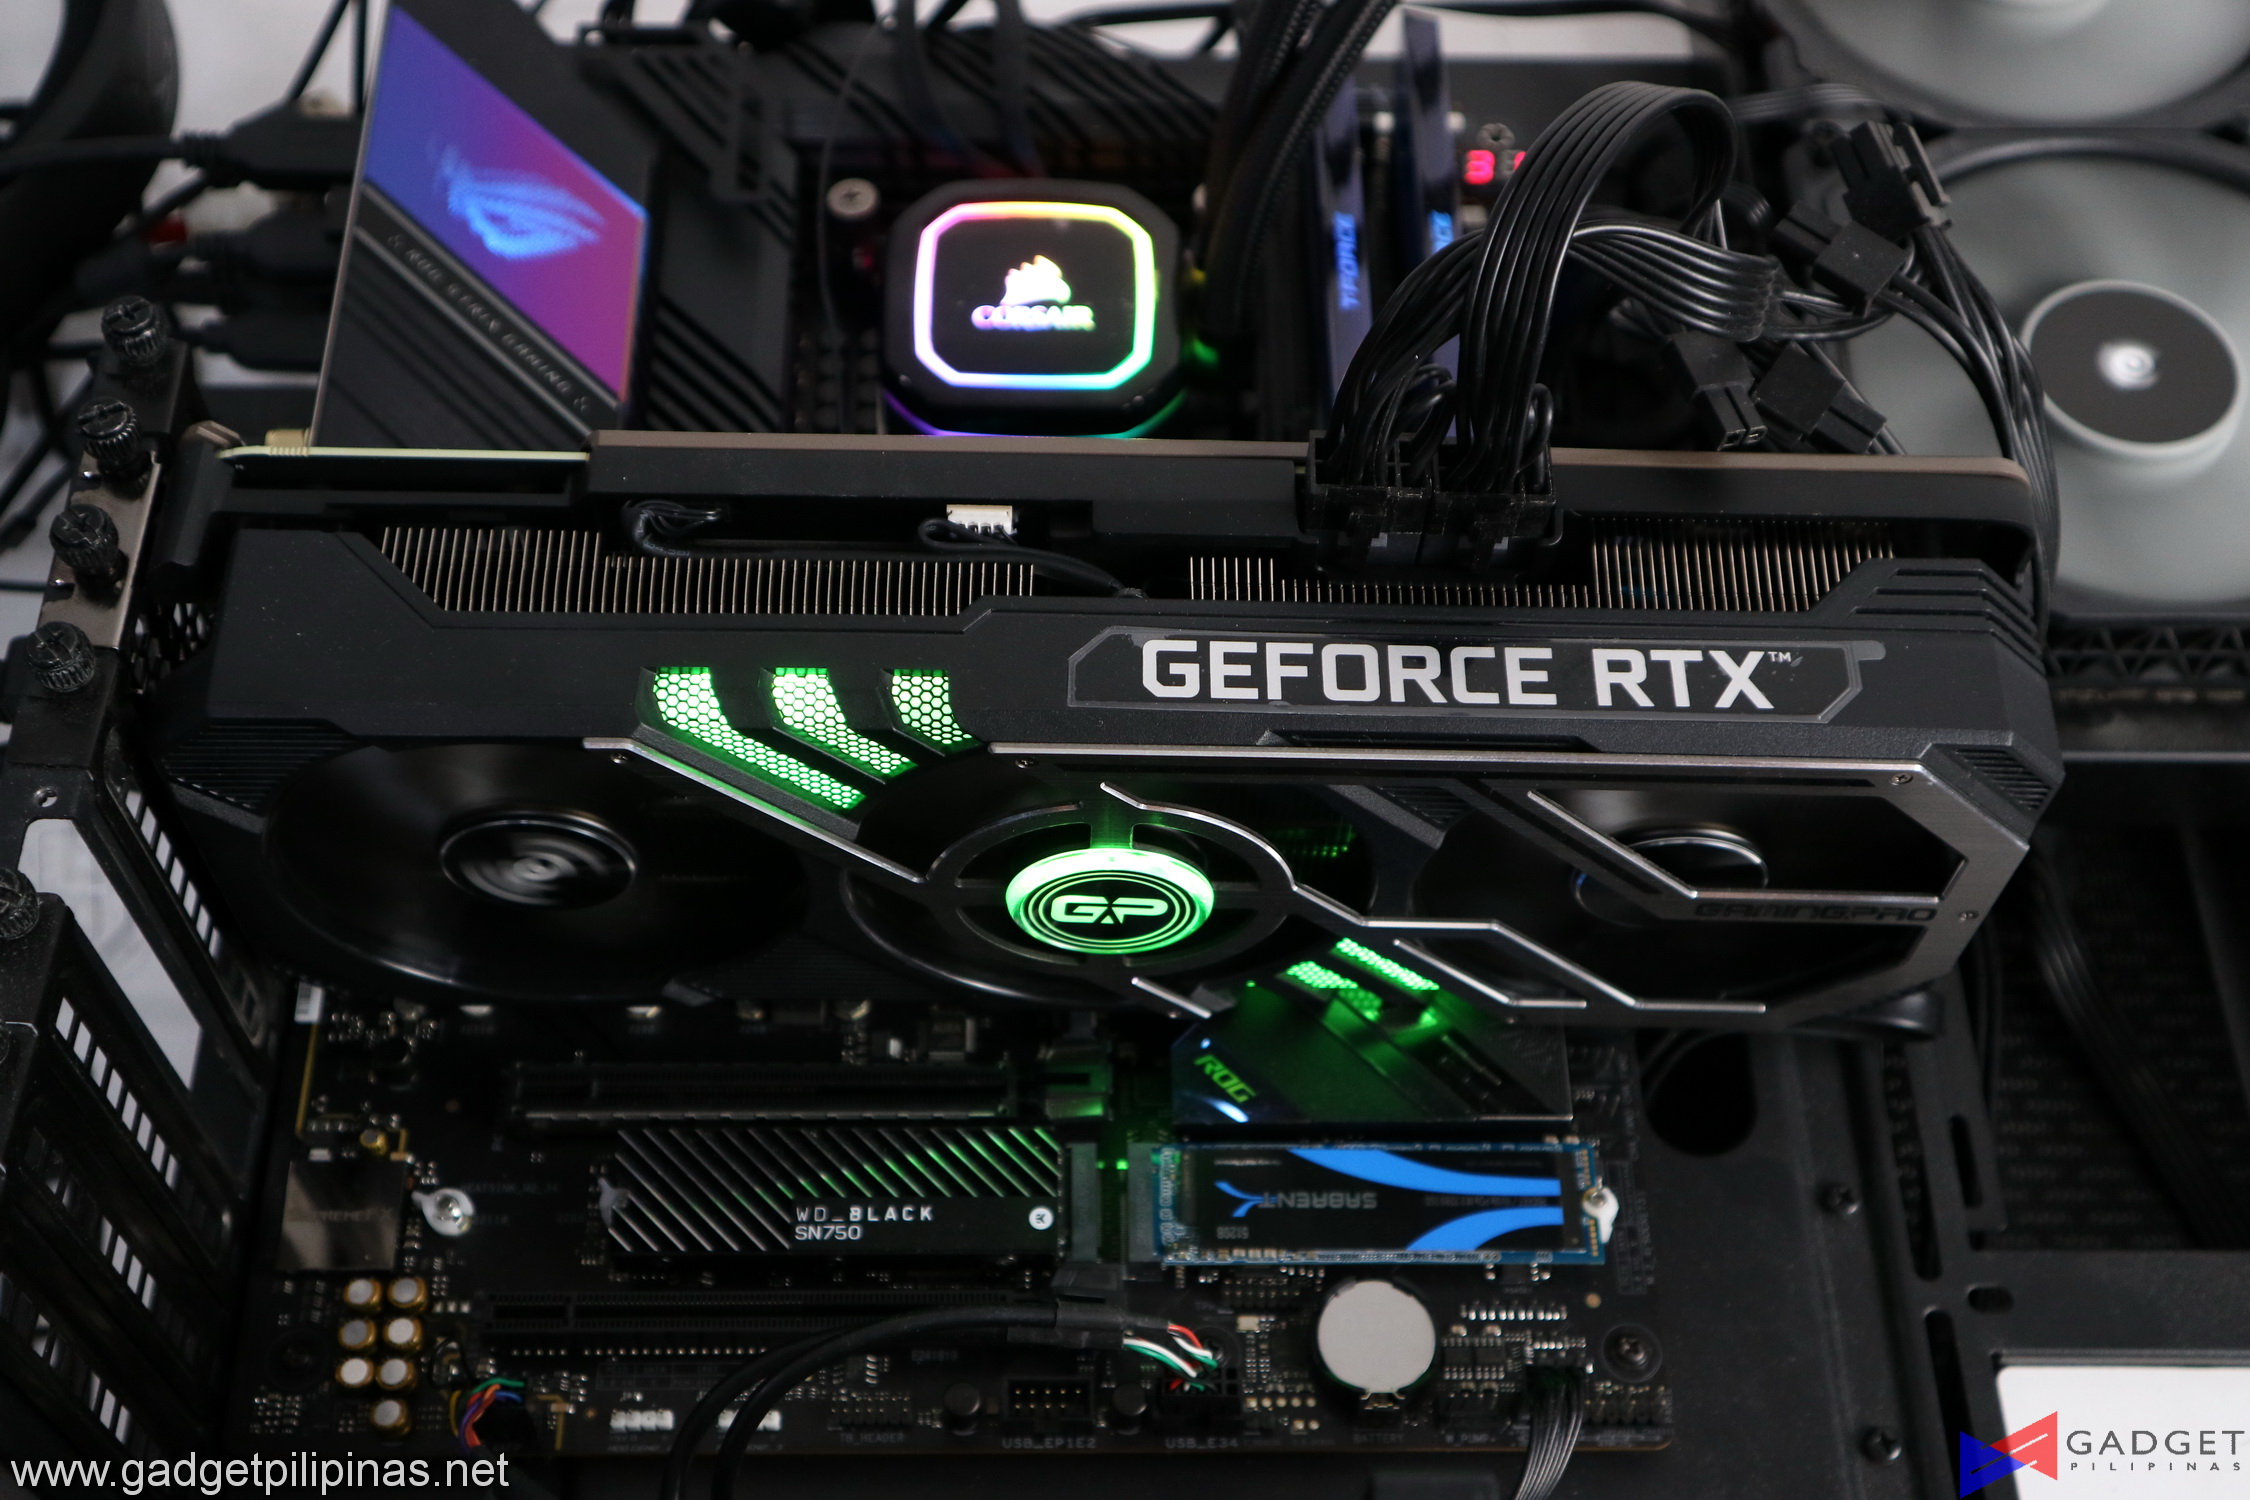 Palit RTX 3080 Gaming Pro Review - Palit GeForce RTX 3080 Gaming Pro Review